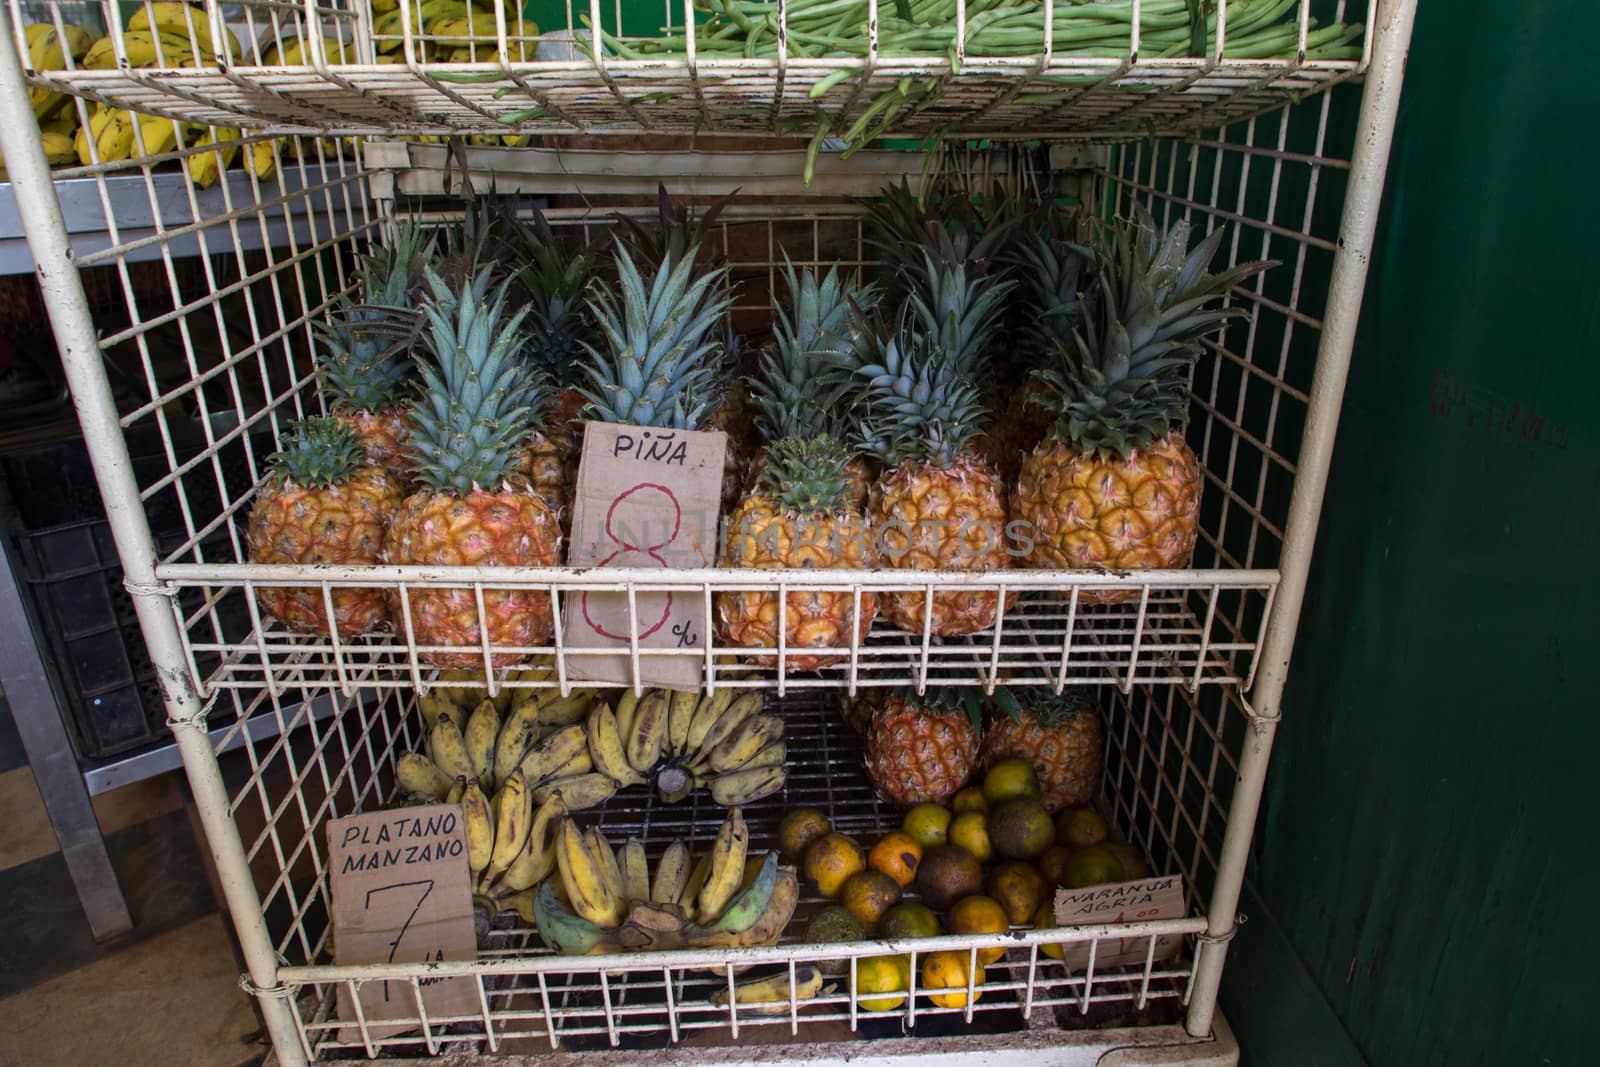 pineapple on display in a store at La Habana